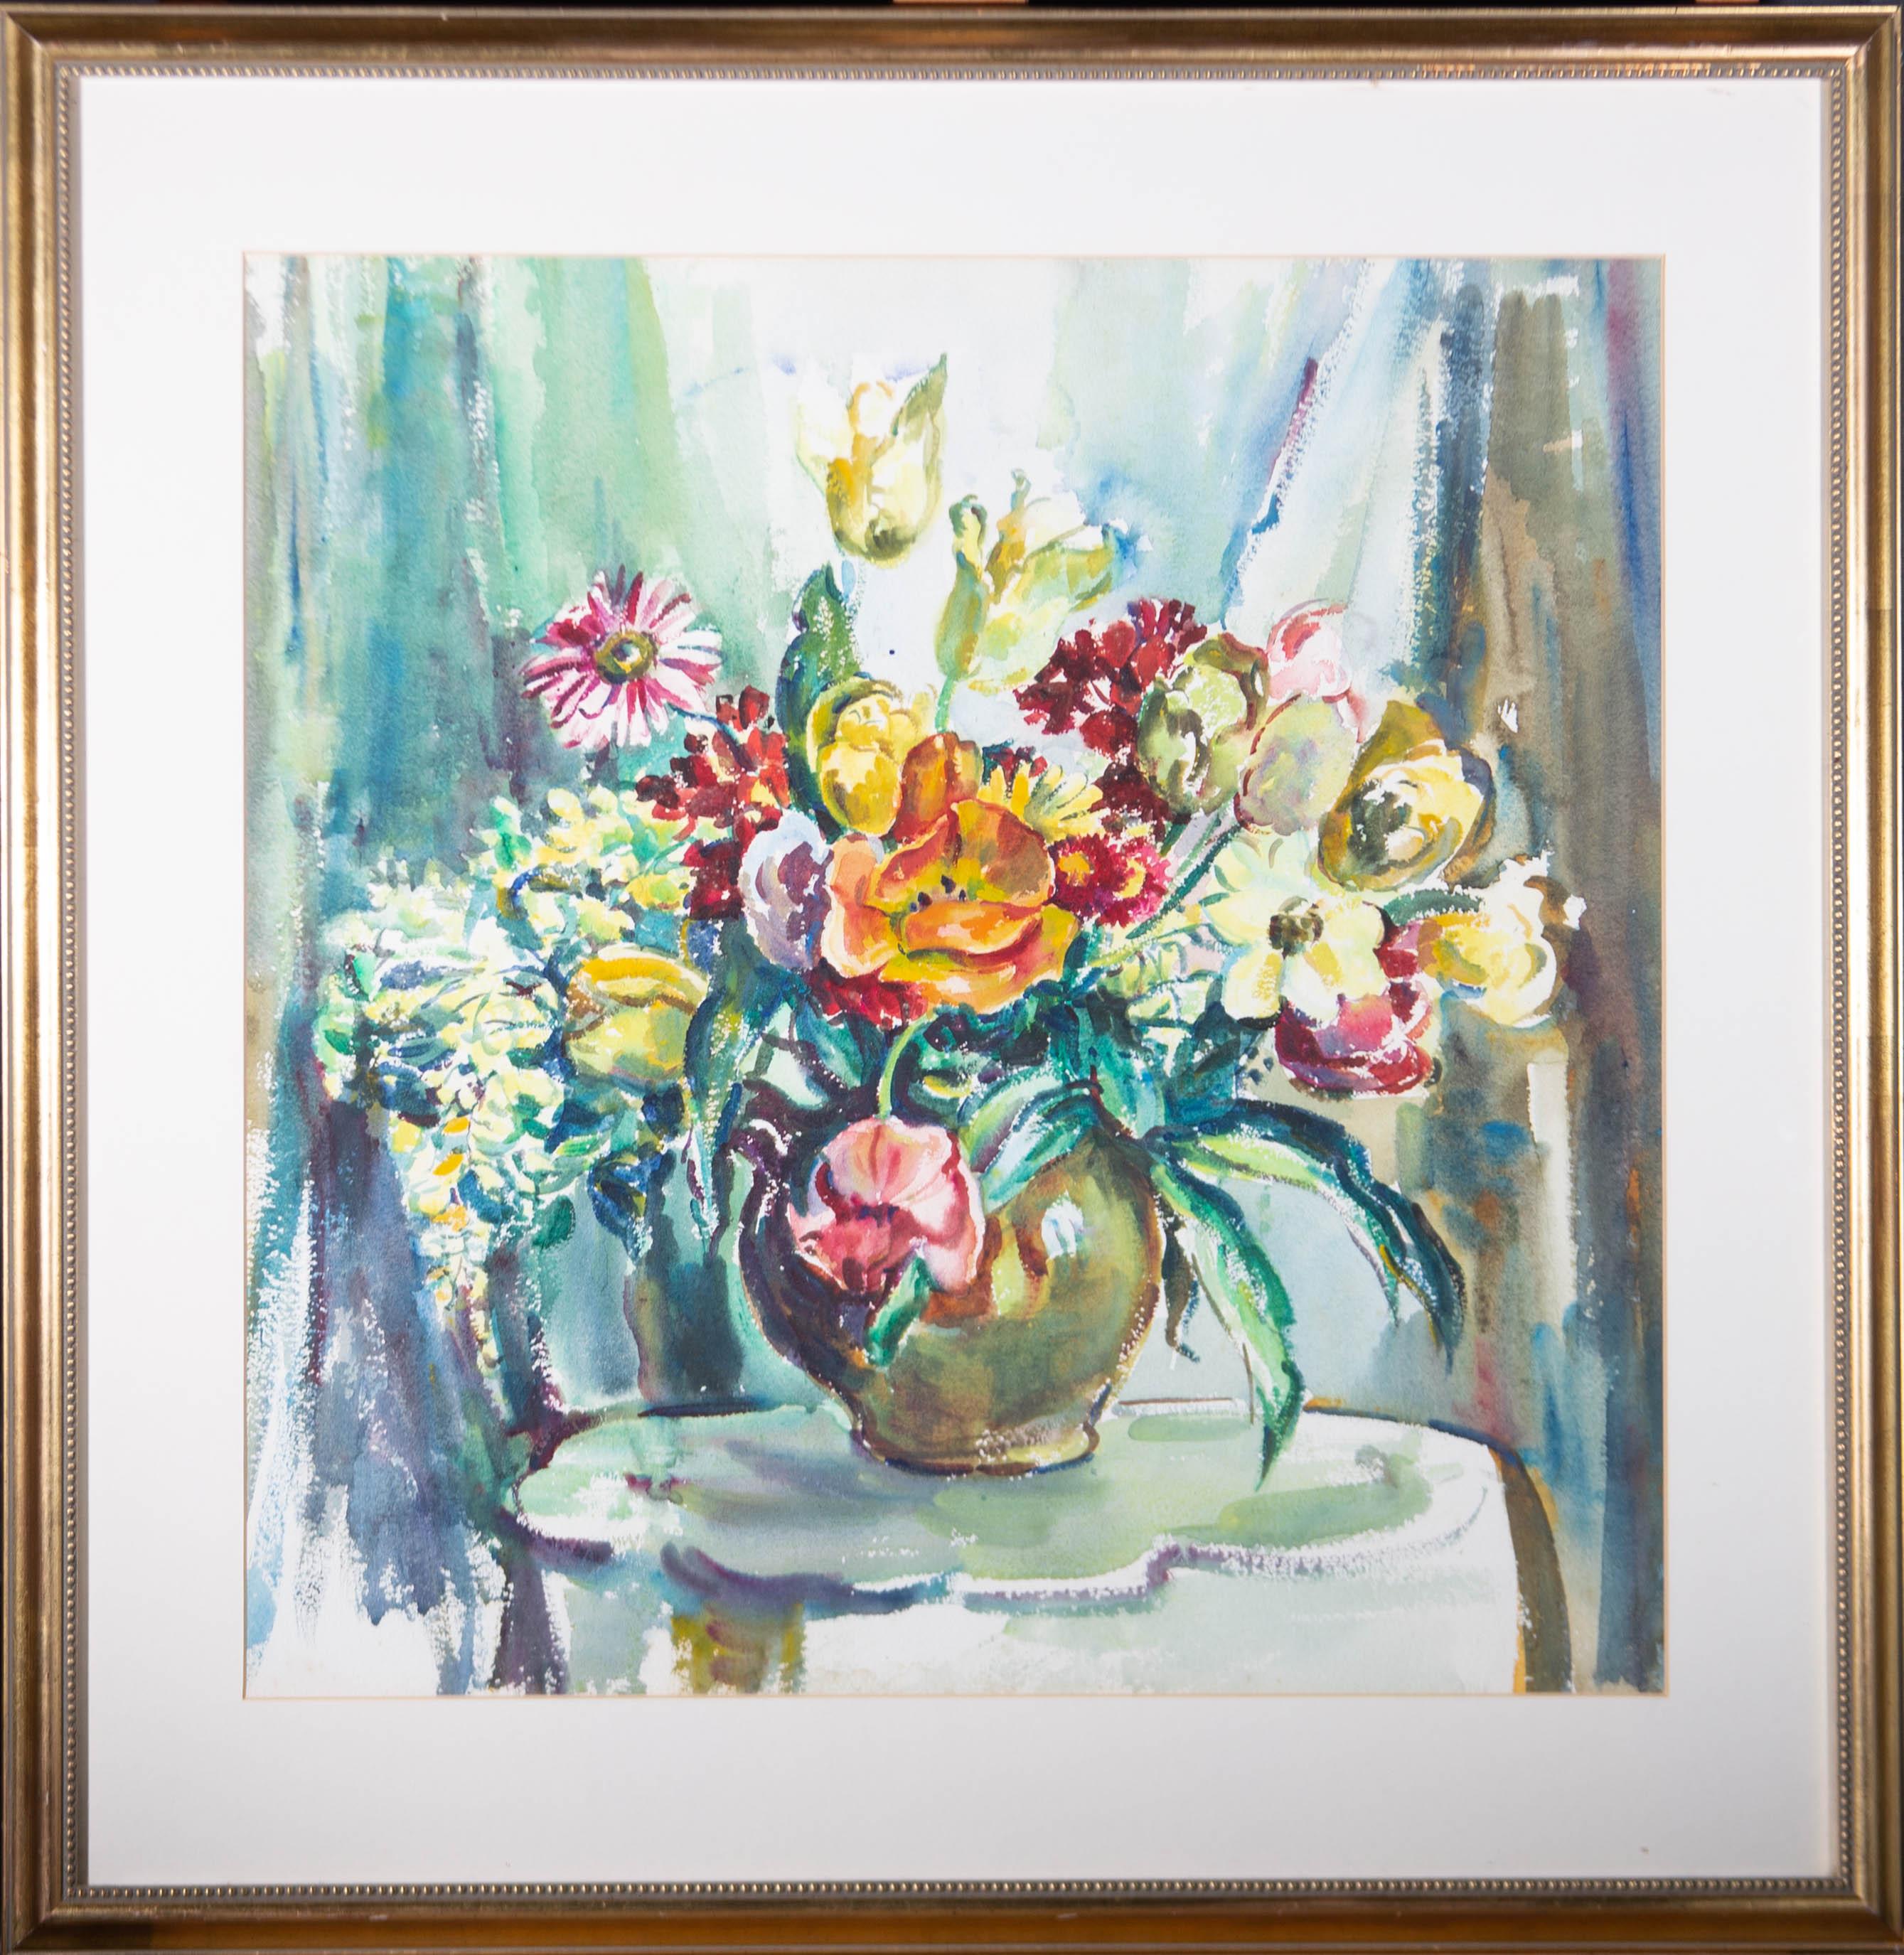 A dynamic and colorful floral still life showing a vase, overflowing with beautiful summer flowers. The painting has been presented in a contemporary gilt effect frame with cream card mount and glazing. On watercolour paper.
